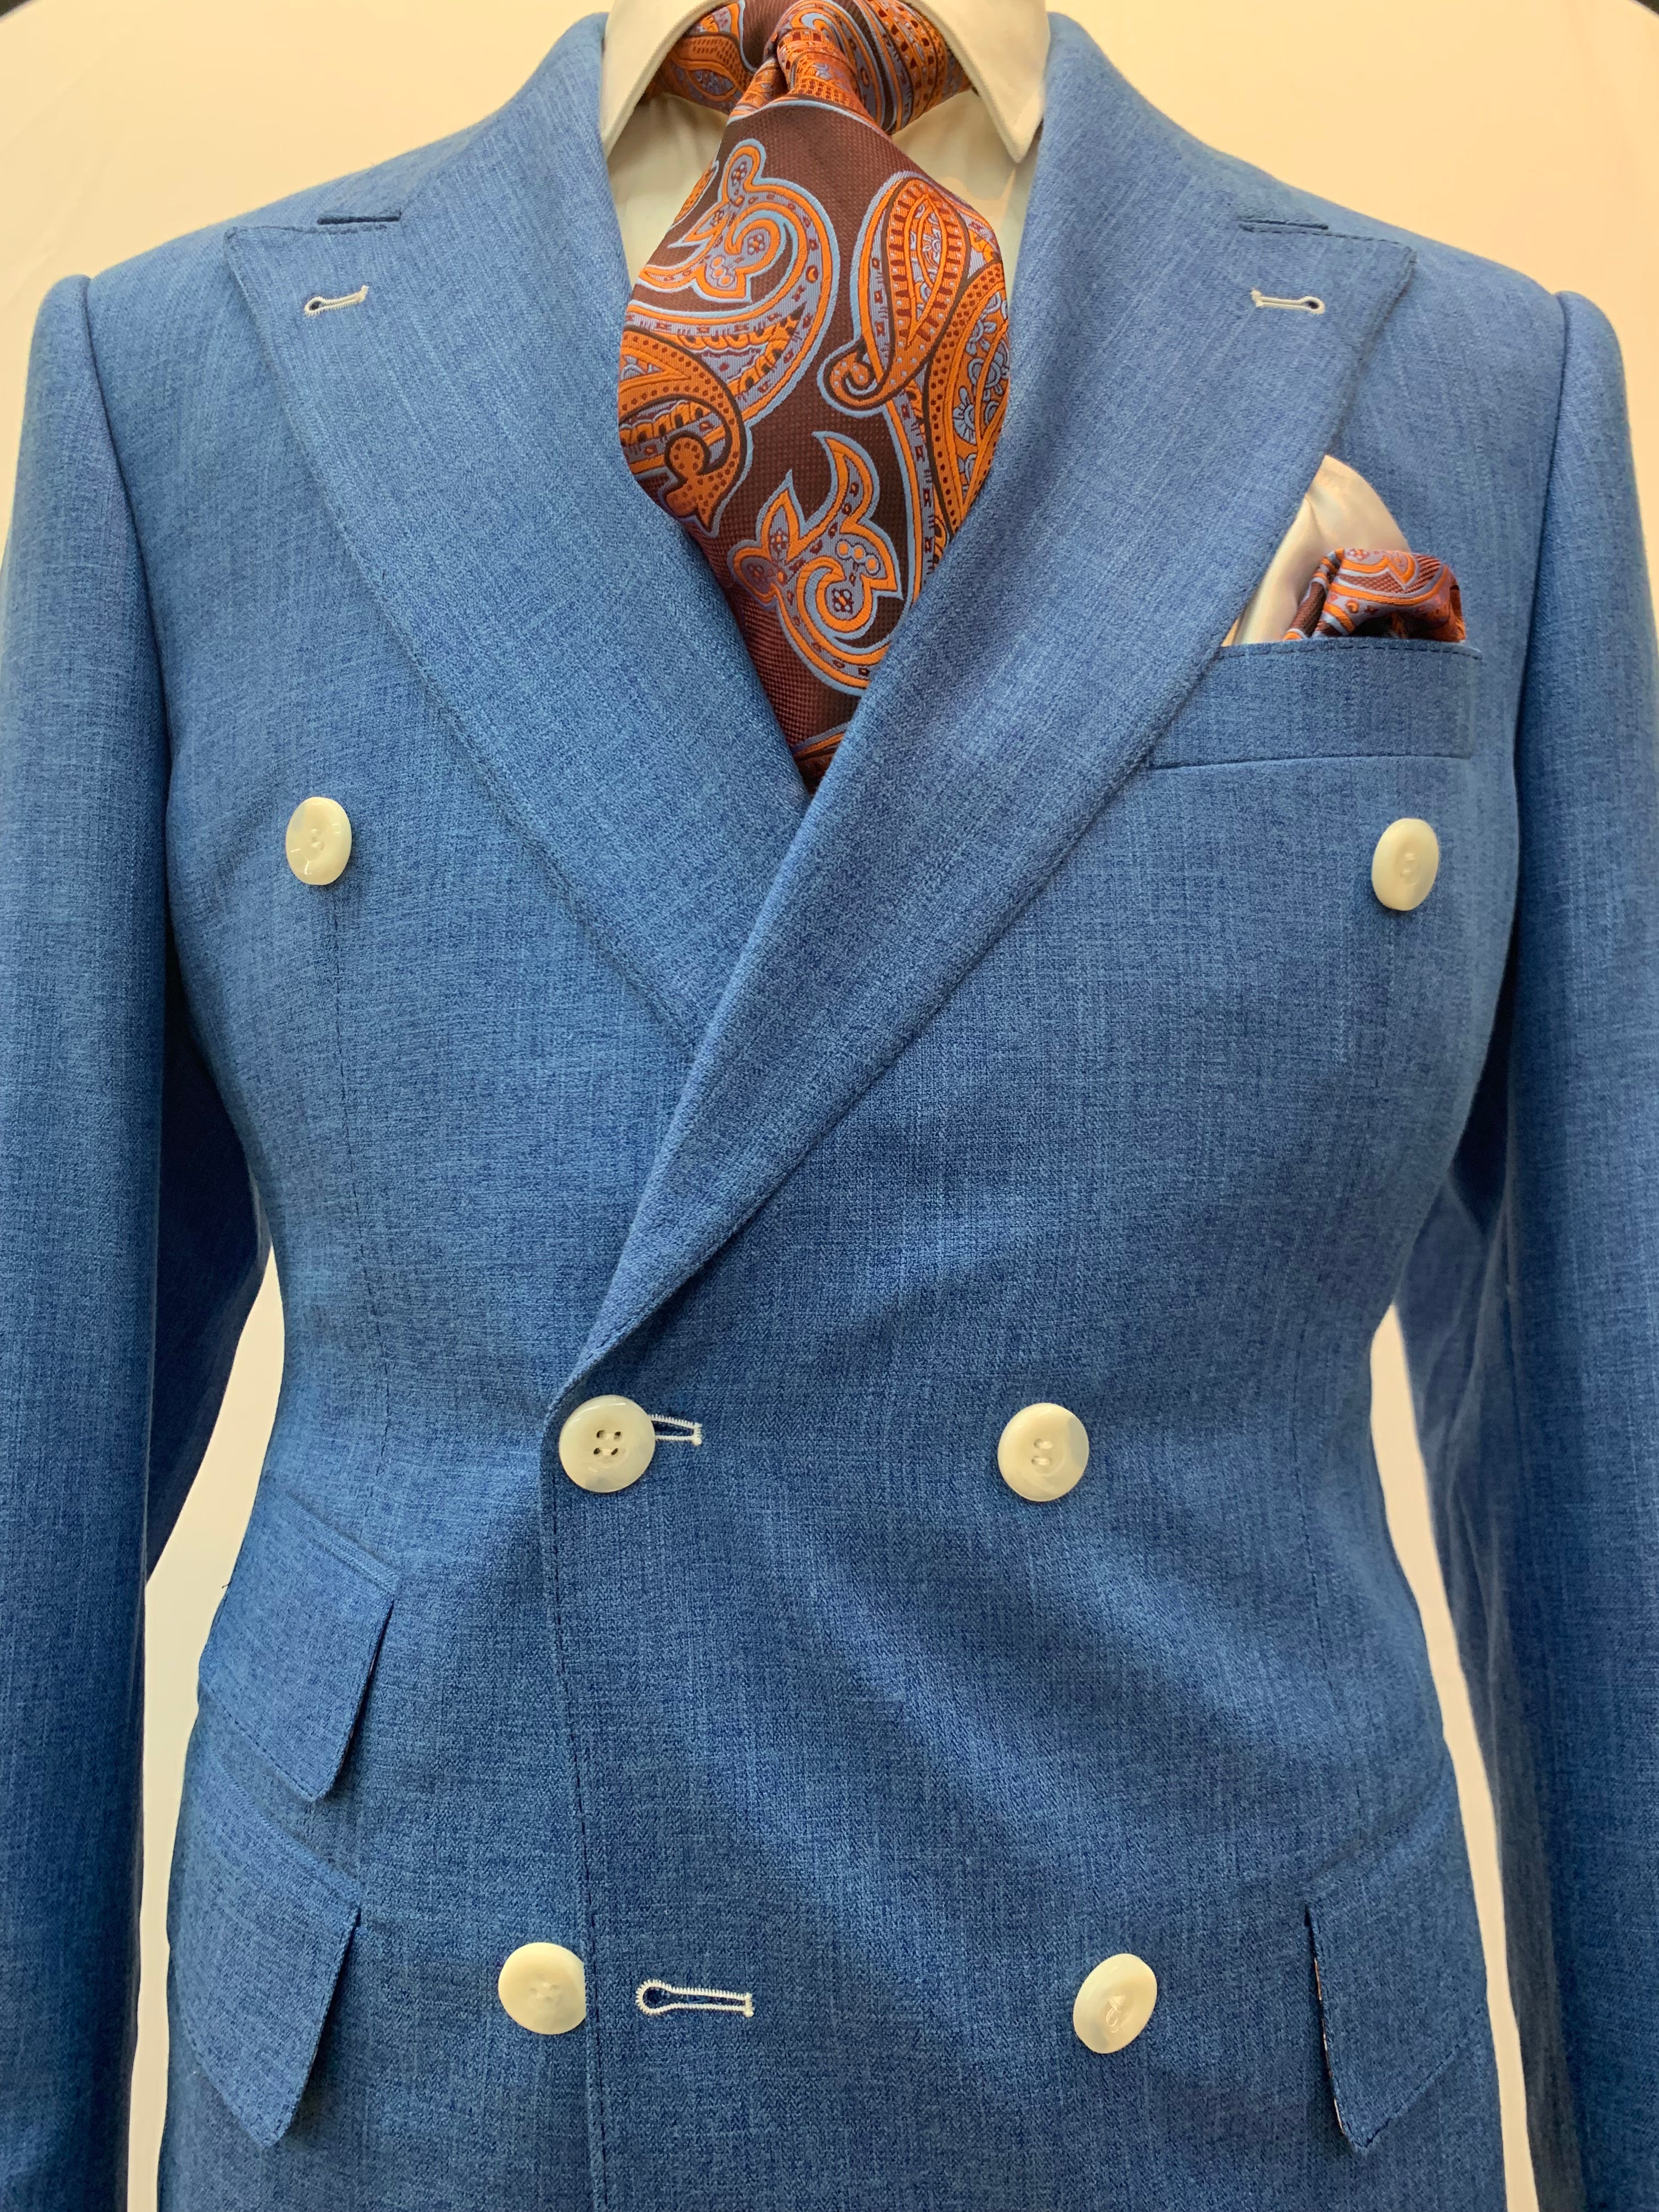 Stitch by Stitch Light Blue Double Breasted Suit